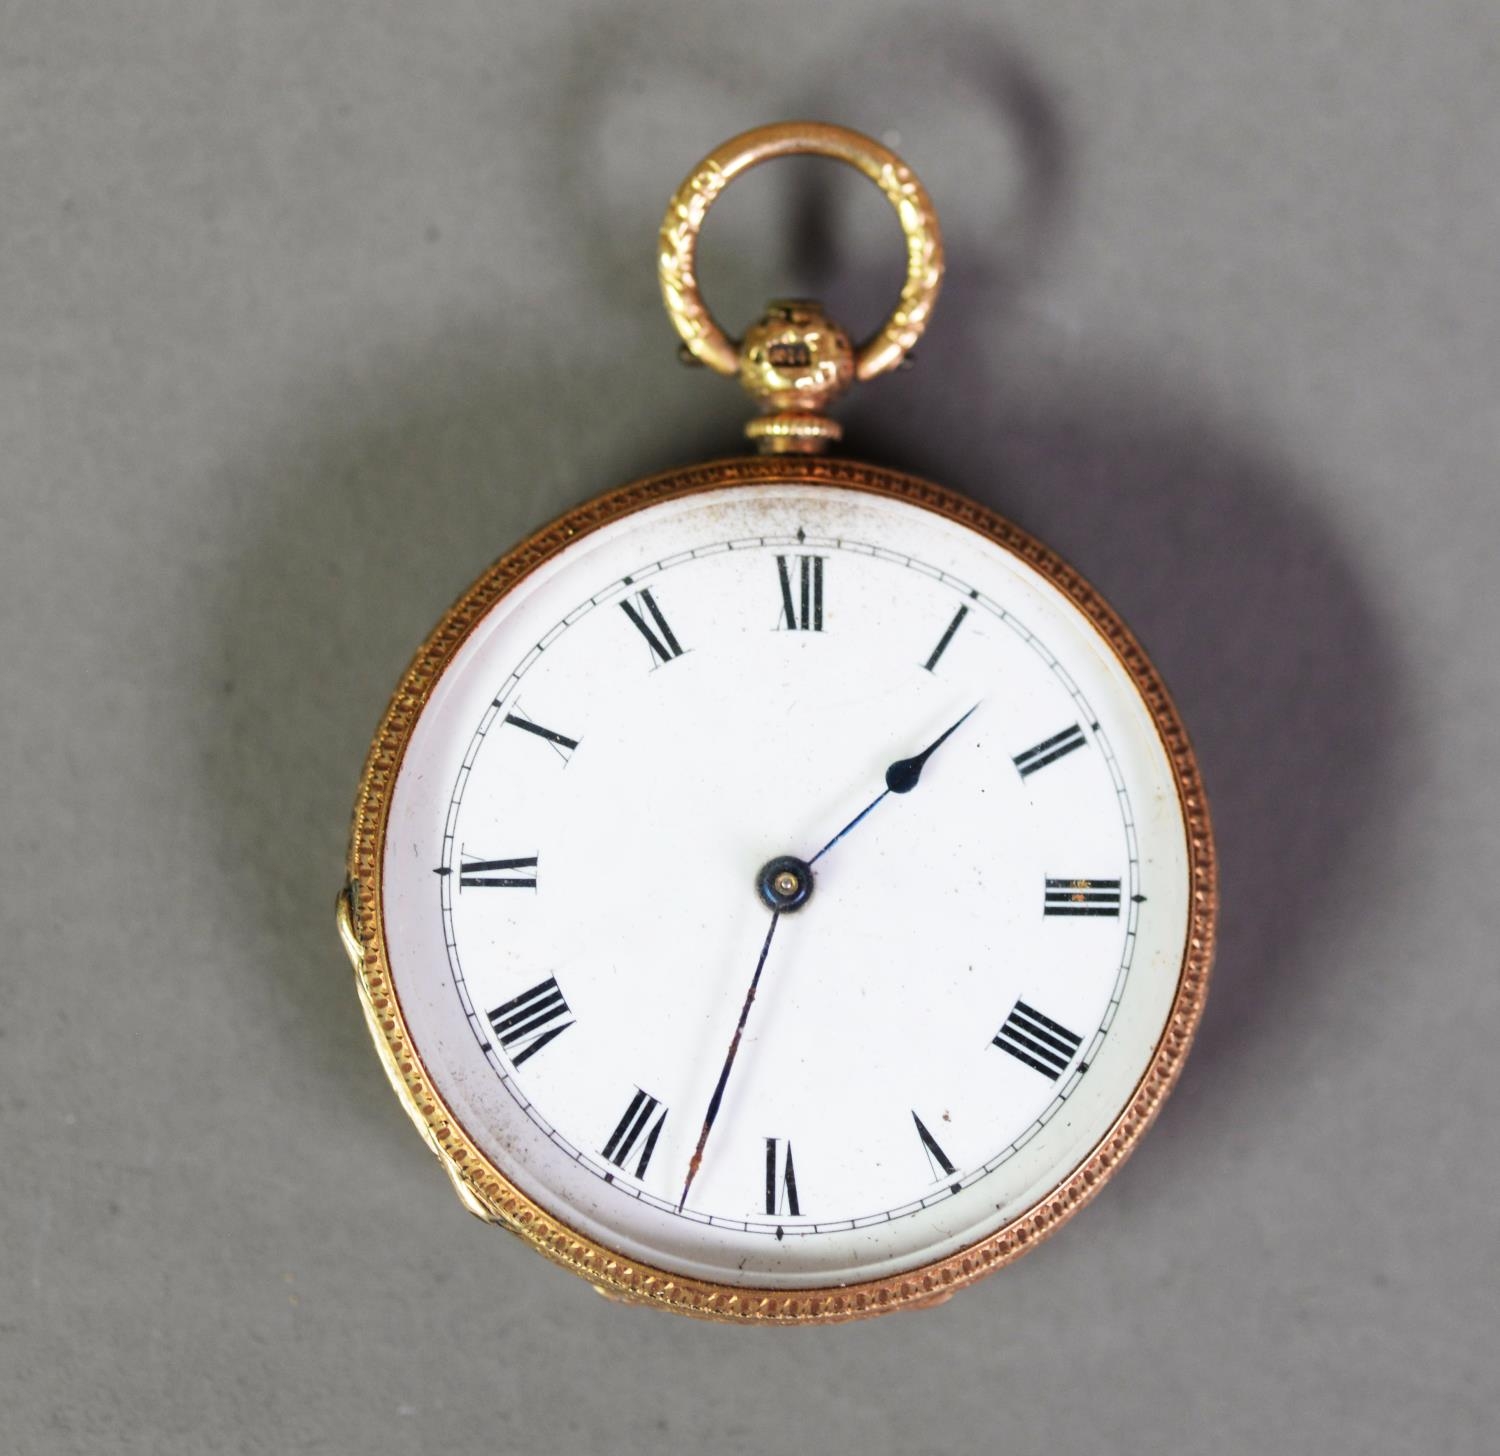 LADY'S SWISS 14ct GOLD OPEN FACED POCKET WATCH with key wind movement by T.H. Russell & Son, Geneve,